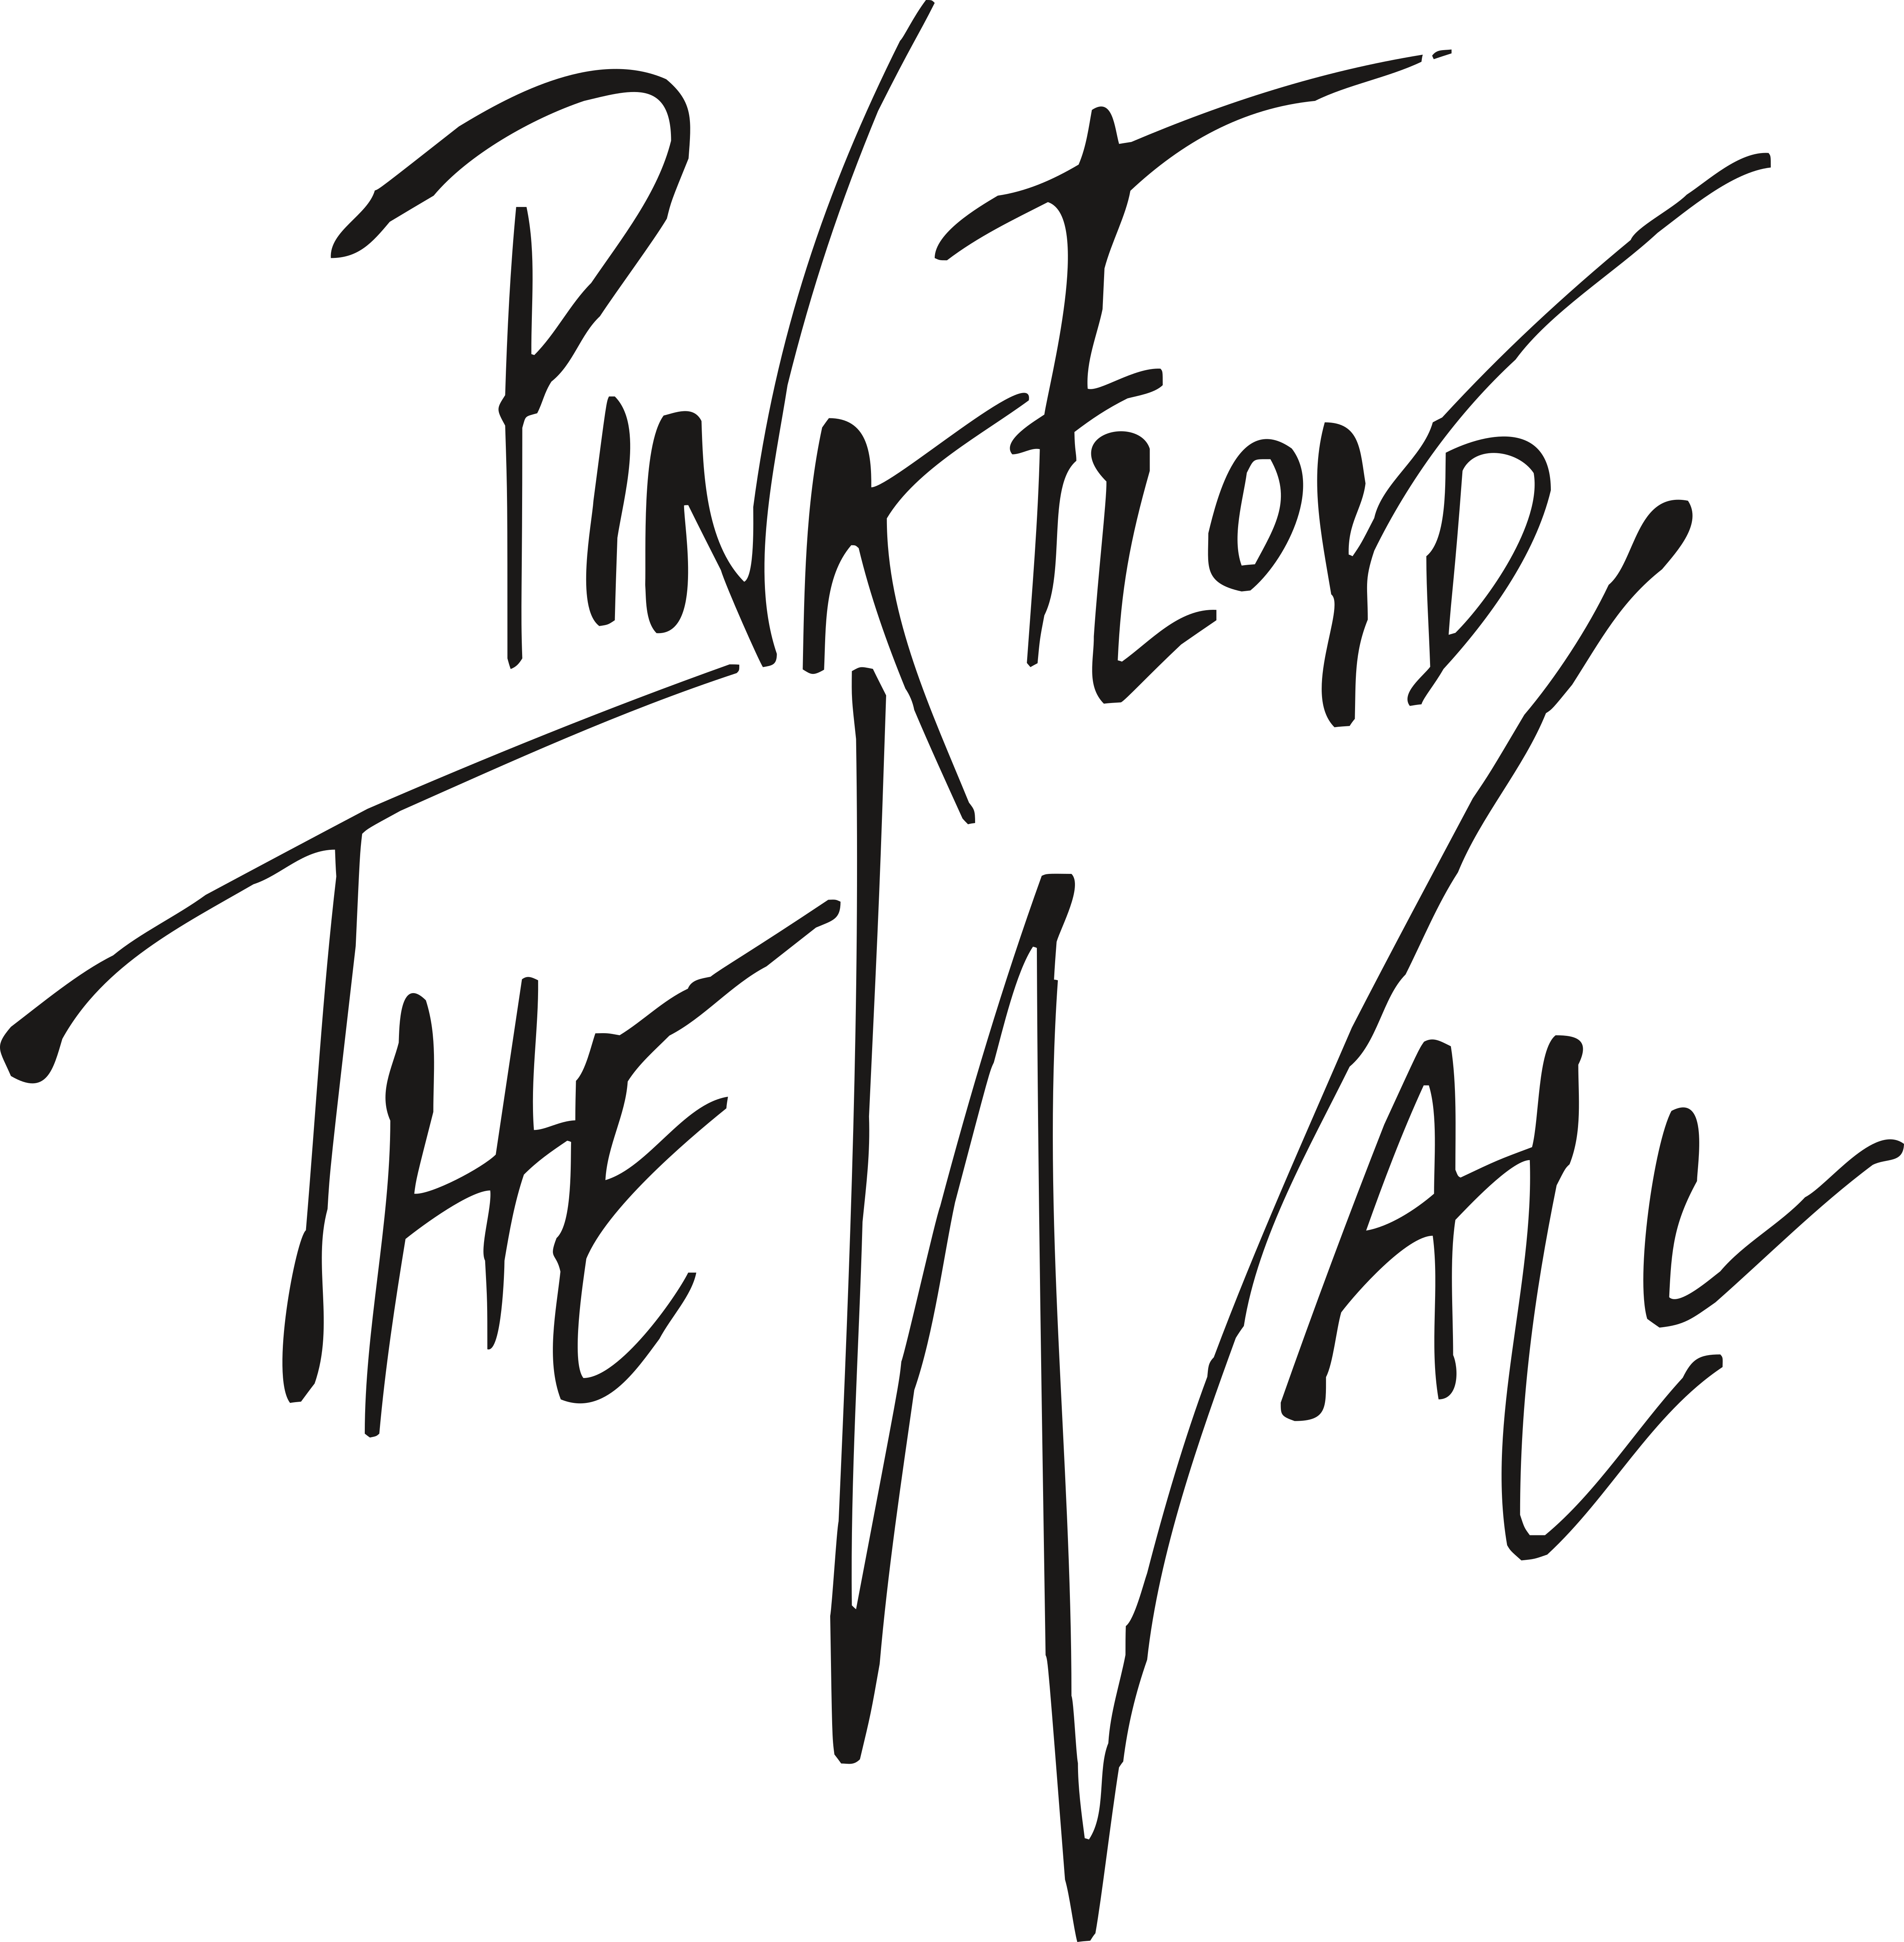 Pink Floyd The Wall.